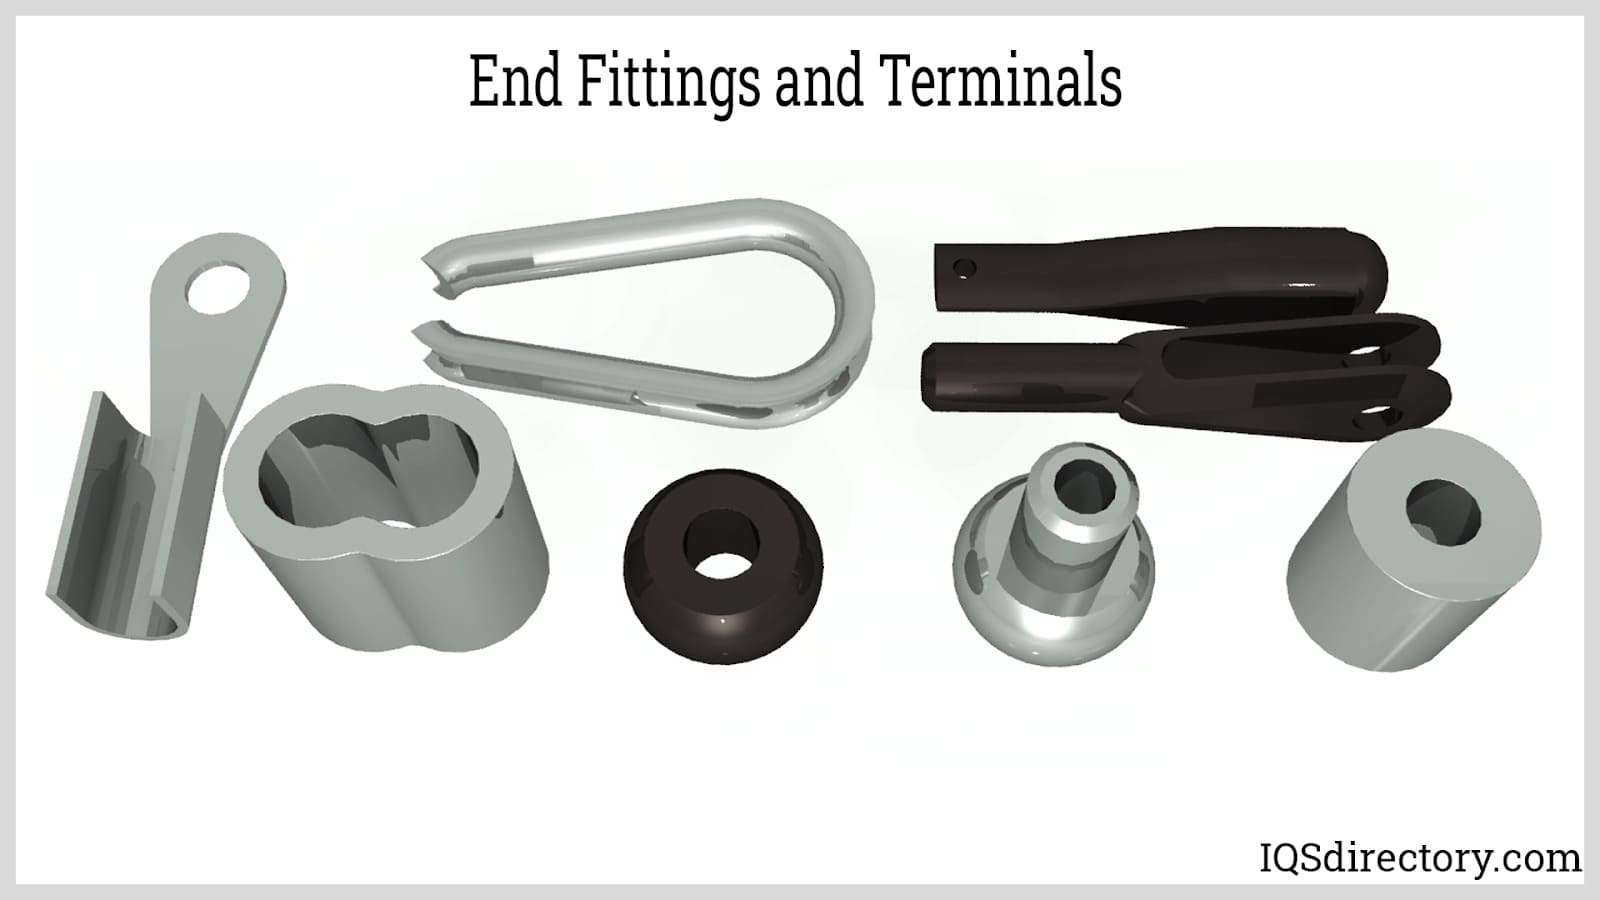 End Fittings and Terminals